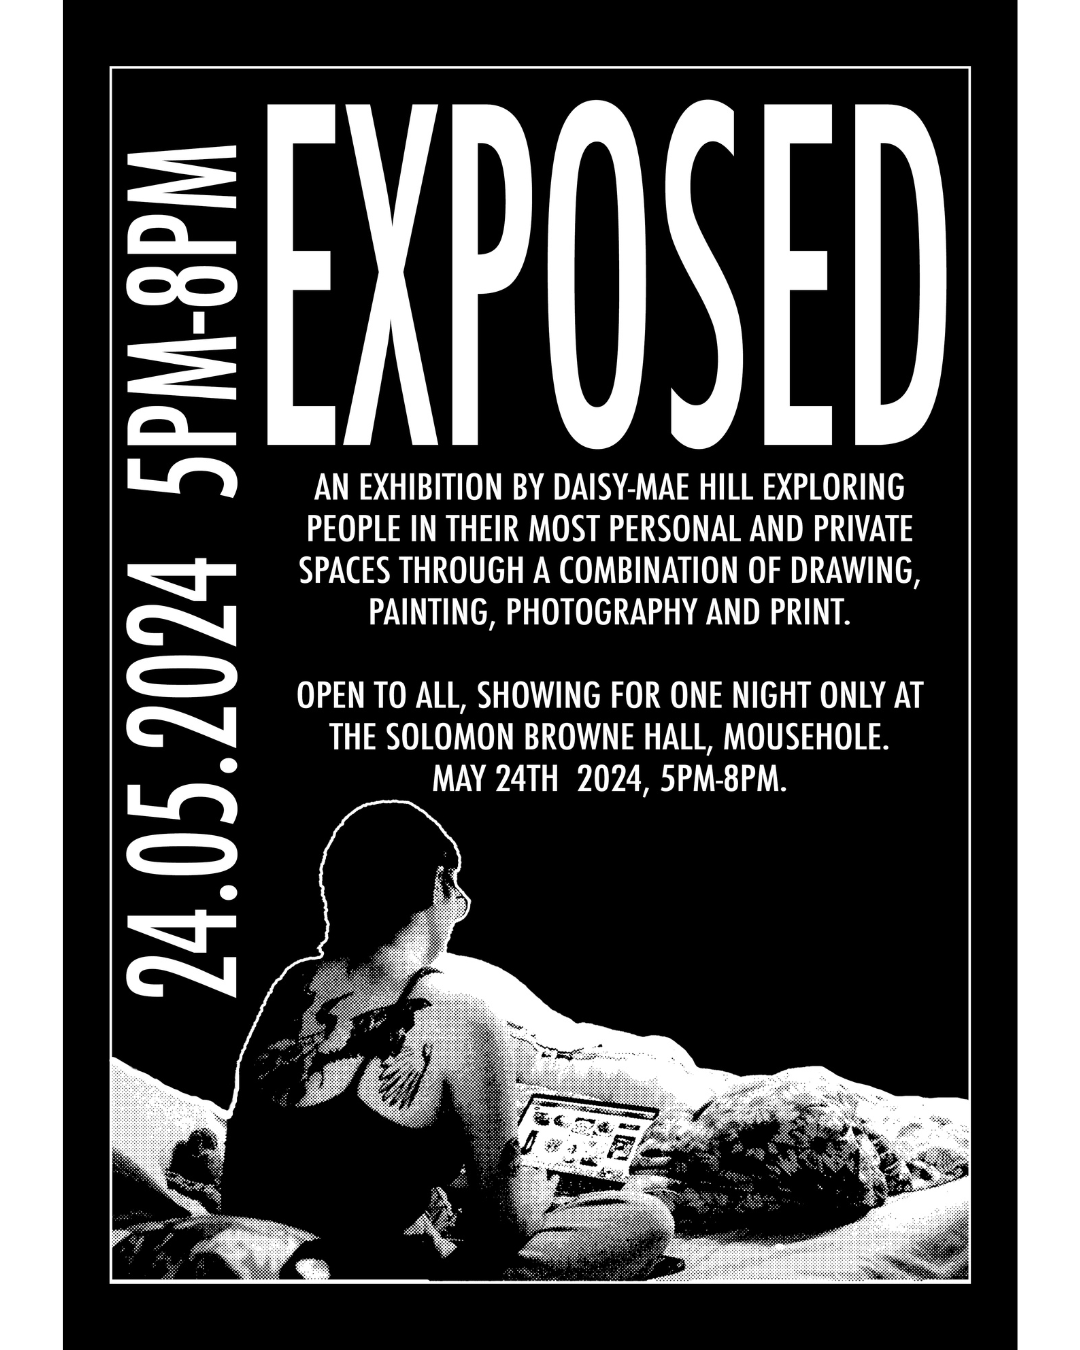 Exposed: an exhibition by Daisy-Mae Hill